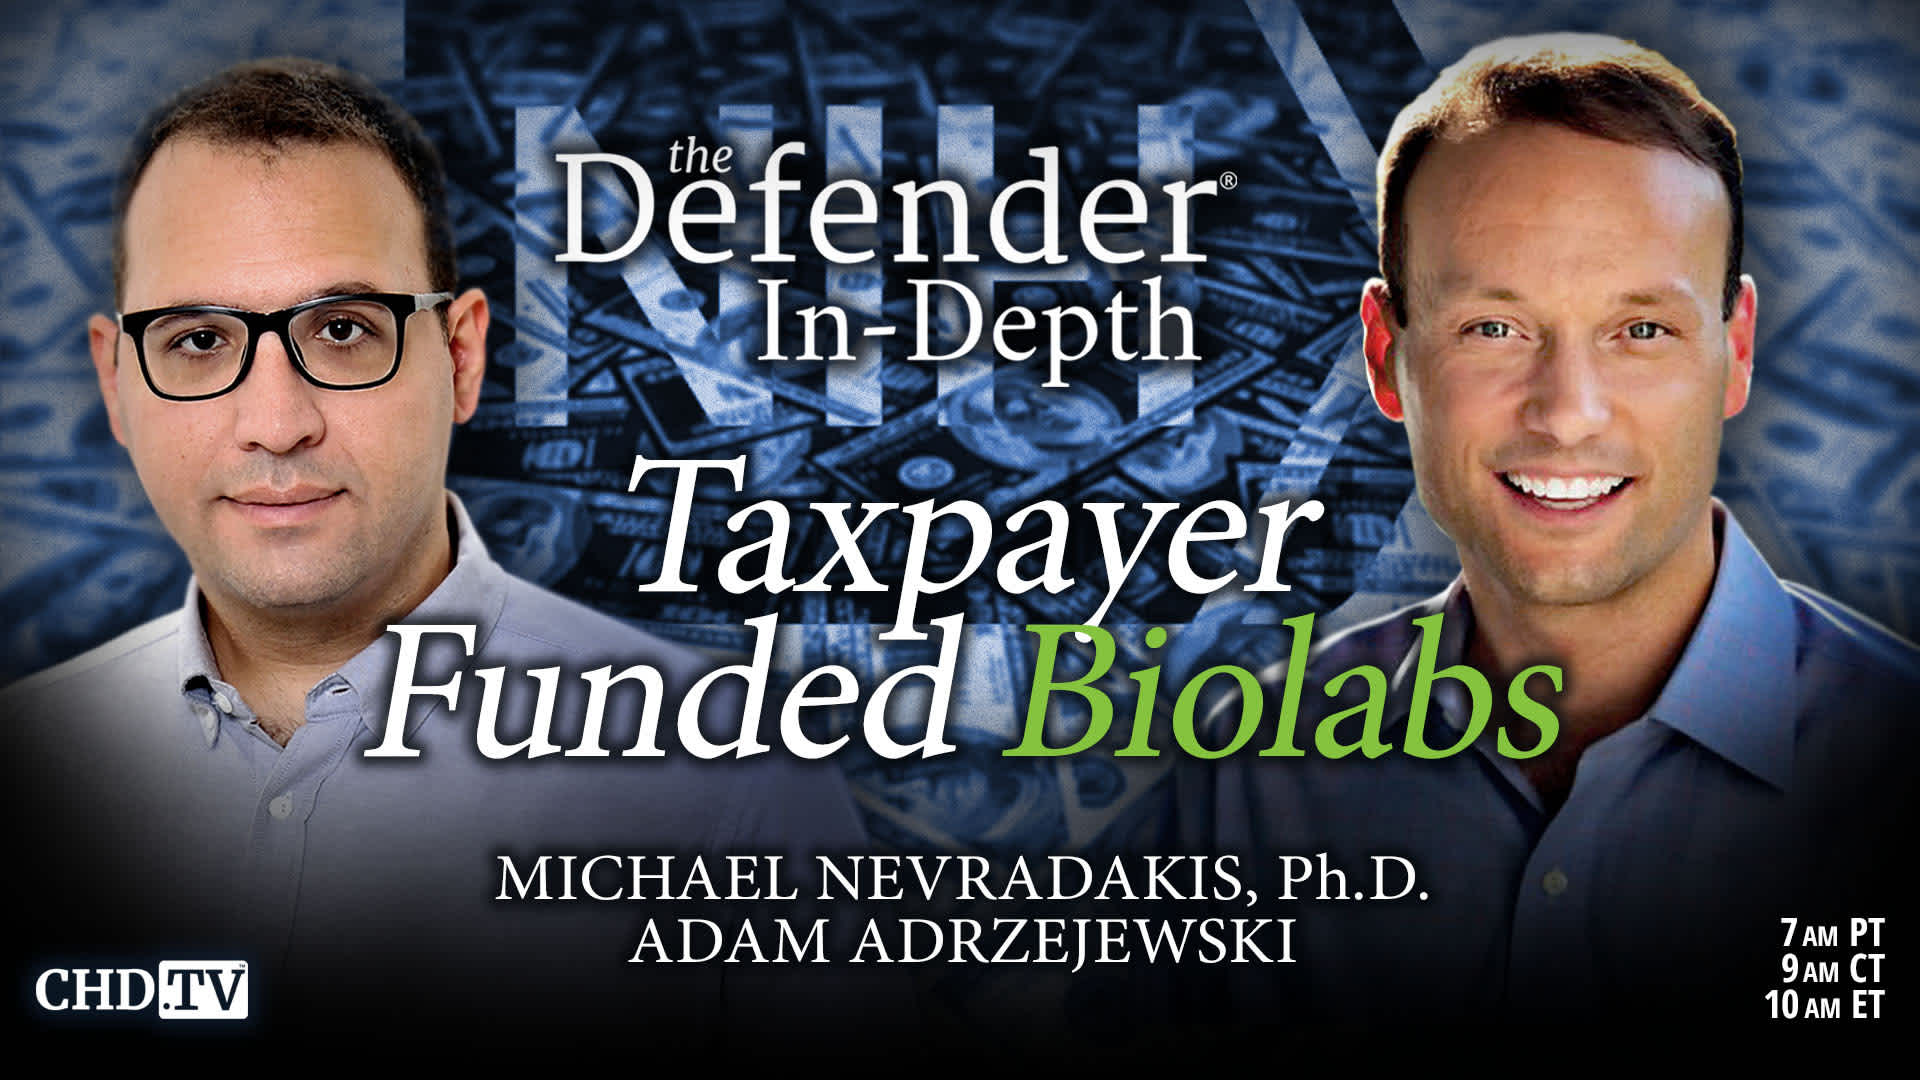 Taxpayer Funded Biolabs